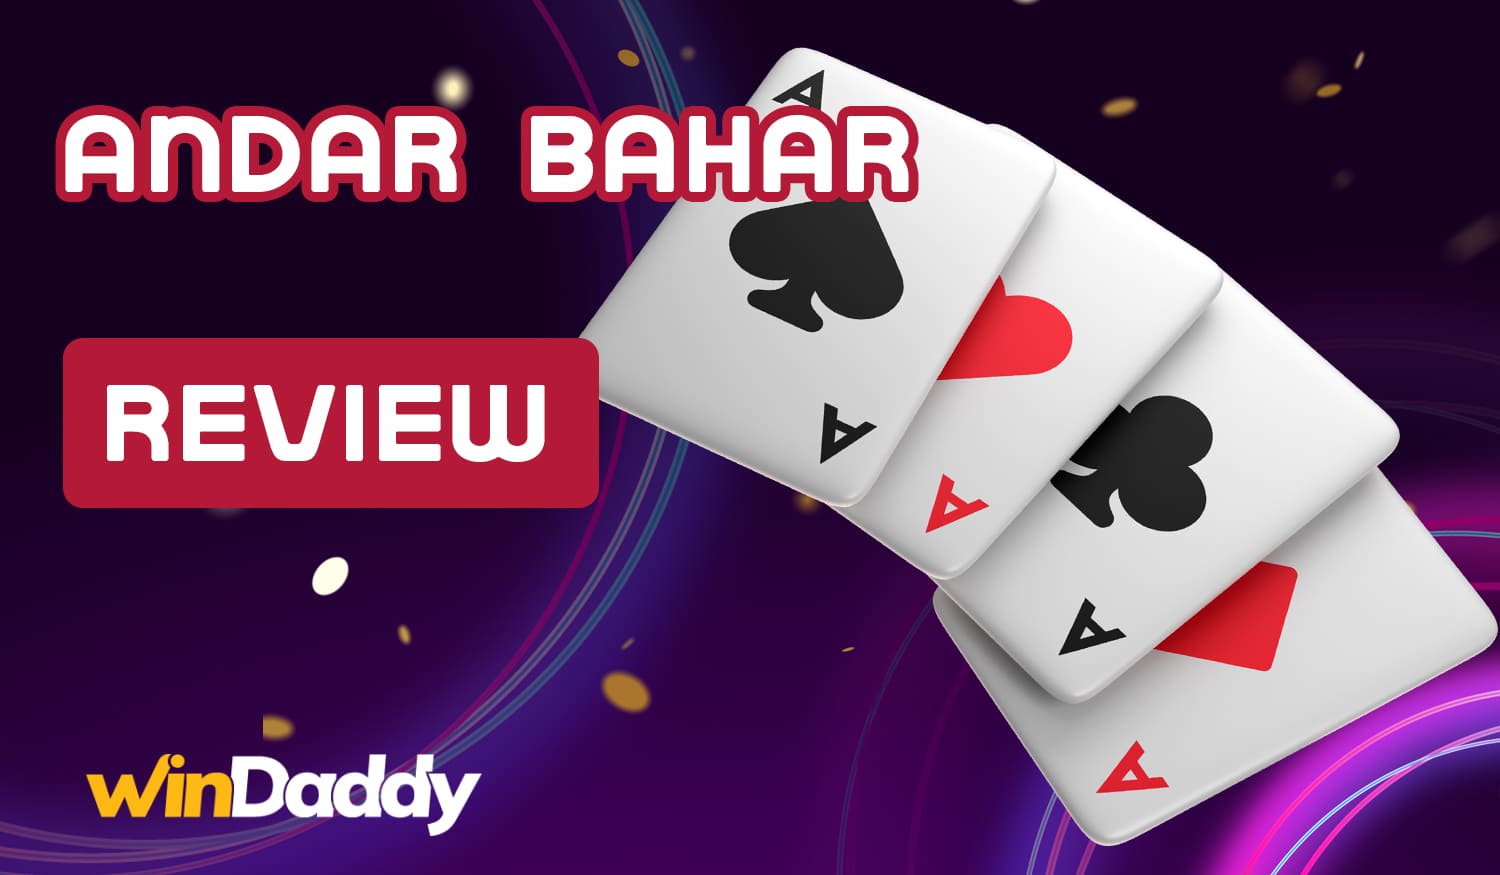 Basic rules of playing Andar Bahar on Windaddy website